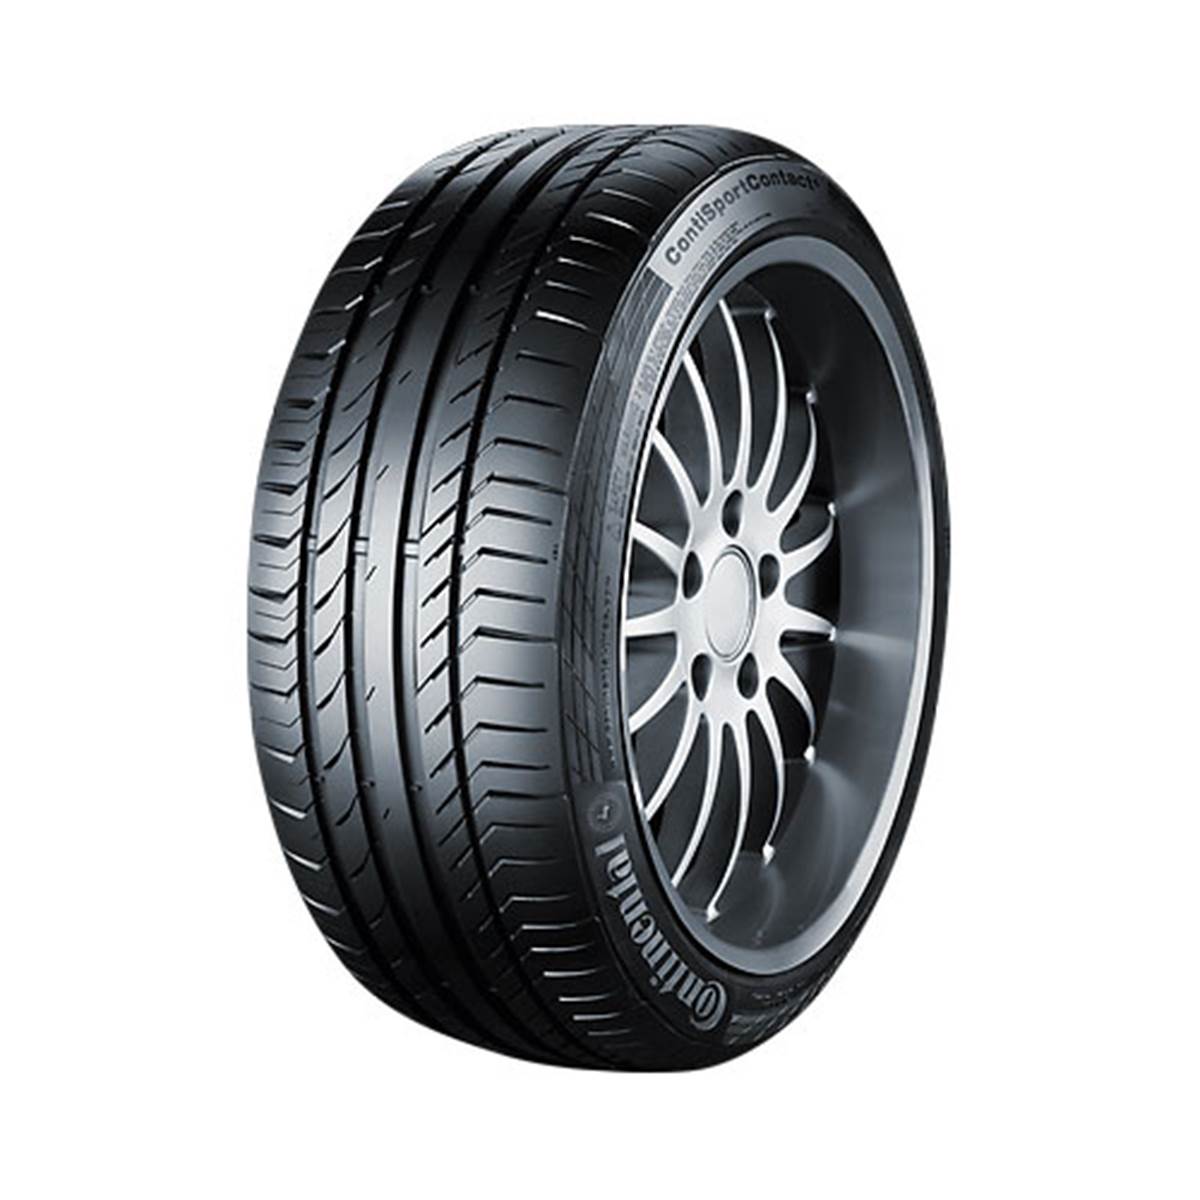 Continental Neumático  Contisportcontact 5 OPE 235/50R18 97W